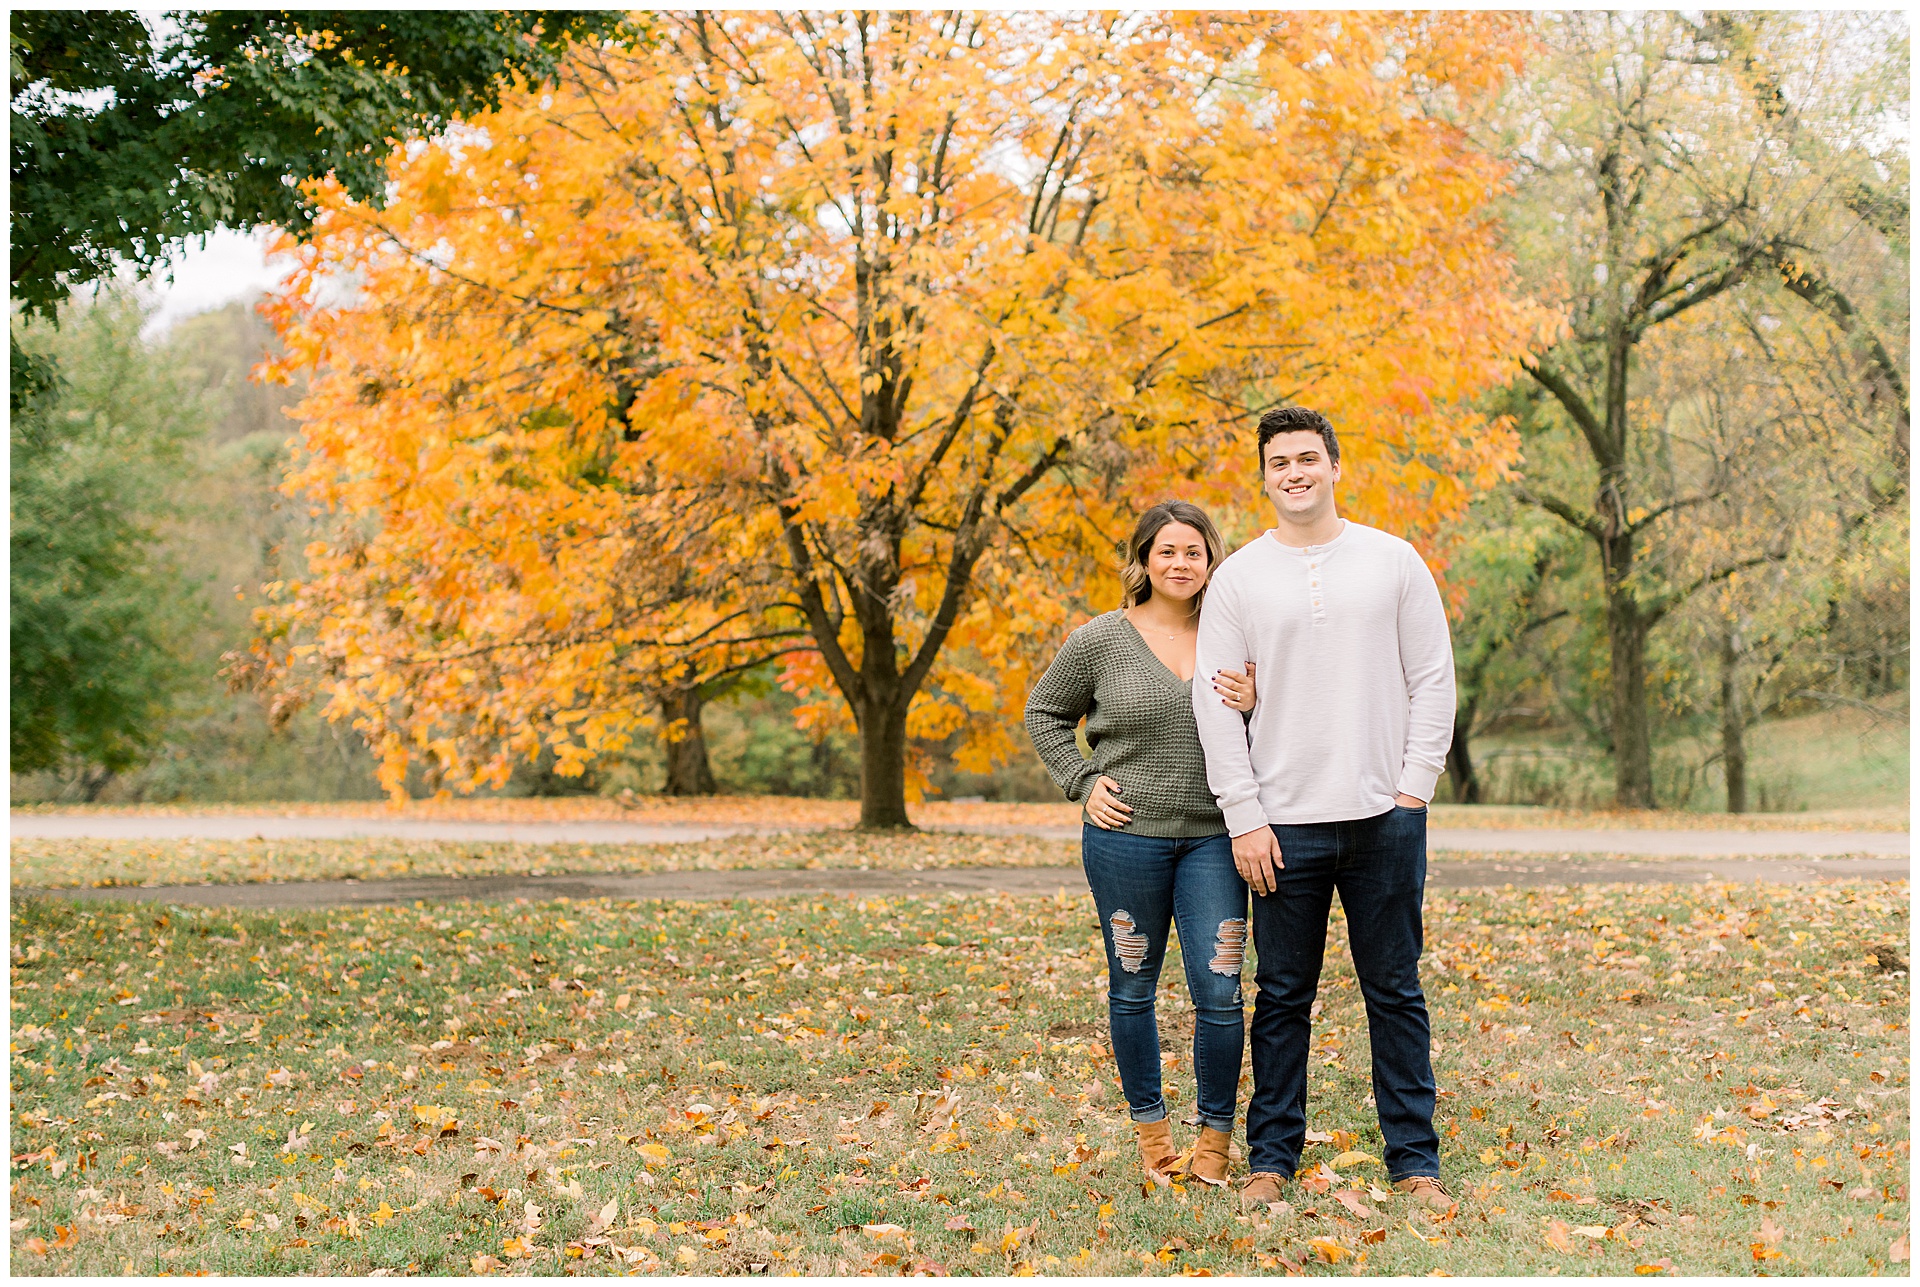 engagement photo session at a colorful park in fall 